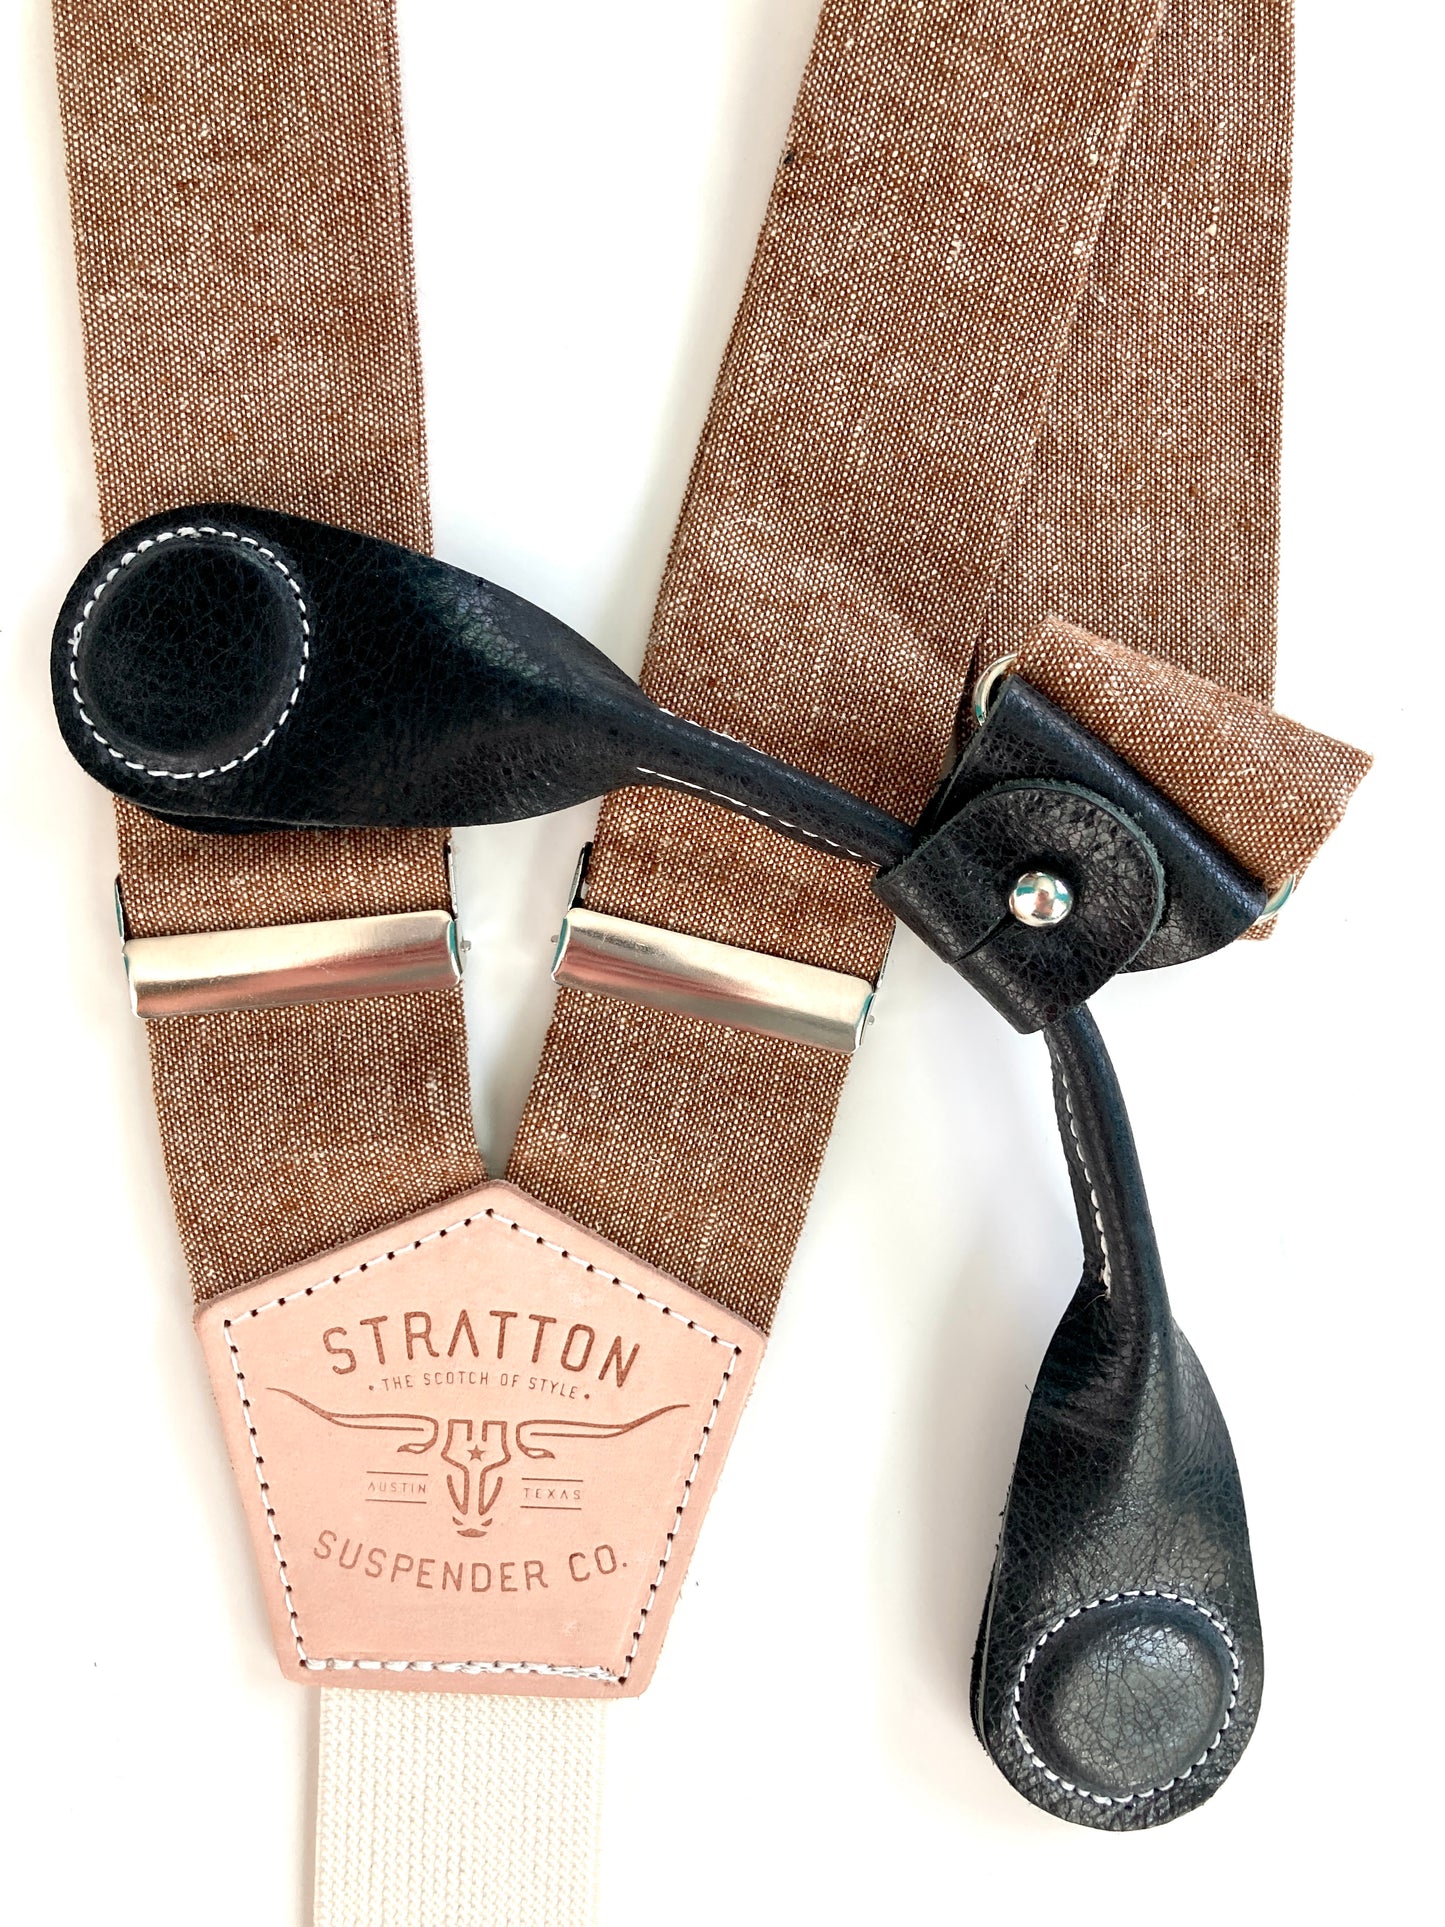 Stratton Suspender Co. features the Nutmeg (brown) linen suspenders on veg tan shoulder leather with cream colored elastic back strap for the Fall 2022 suspenders collection Magnetic Stratton Suspender clasps in Black Pontedero Italian leather hand-picked by Stratton Suspender Co.